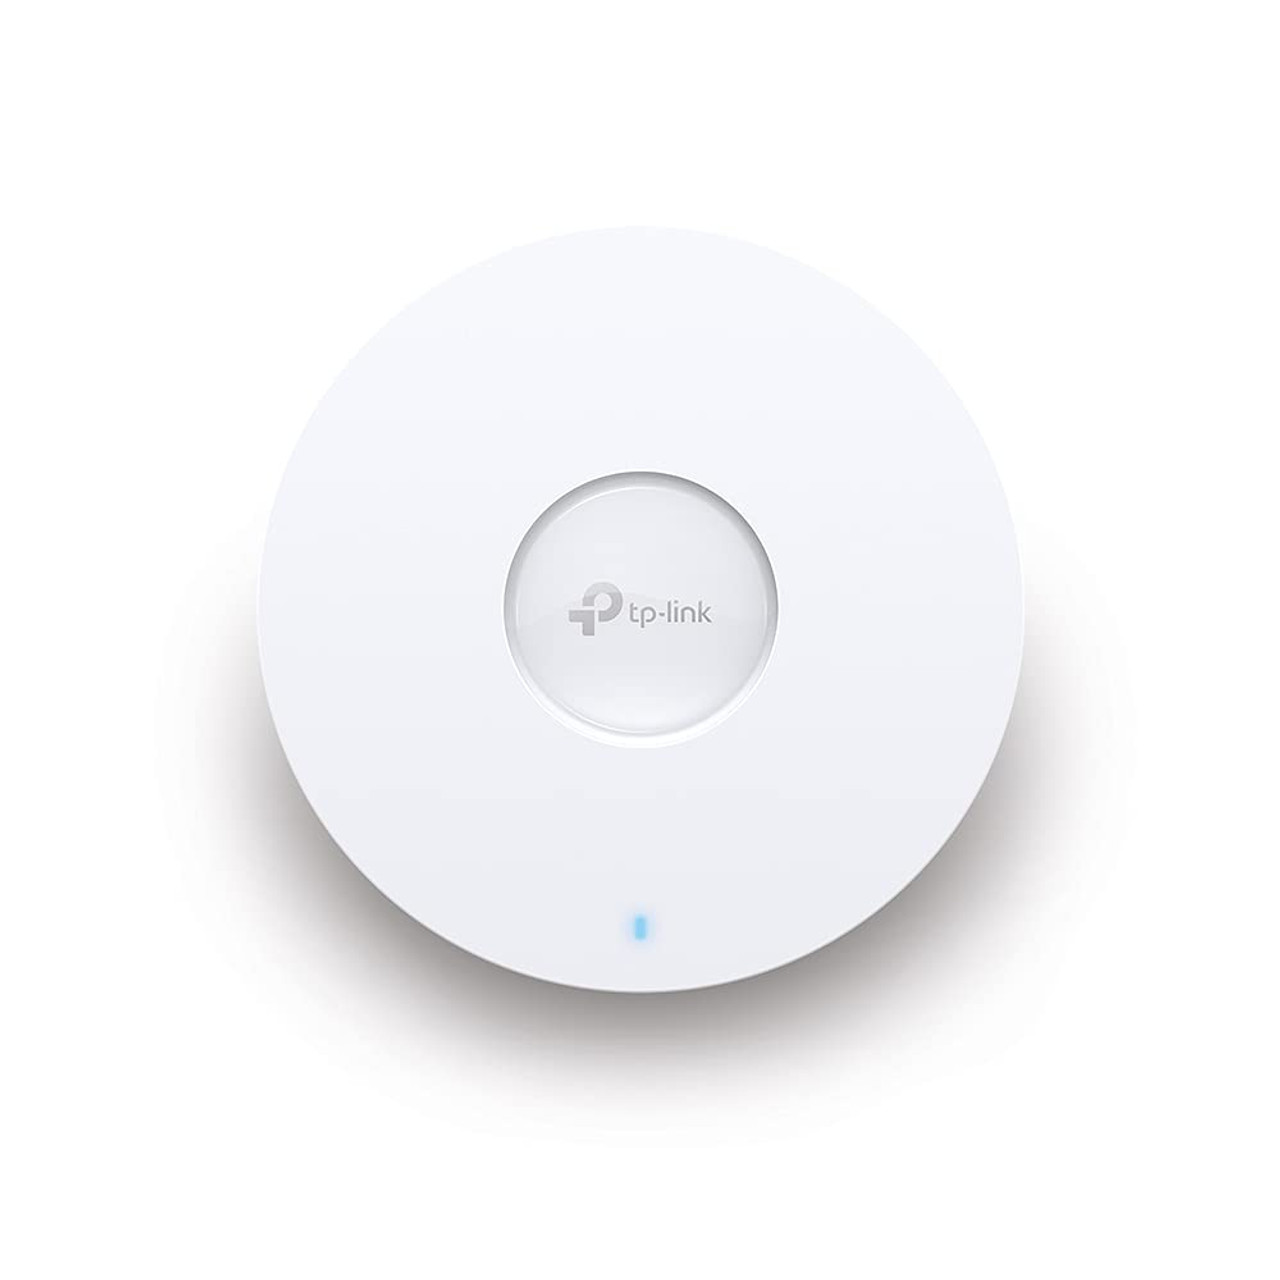 TP-Link EAP610 | Omada Business WiFi 6 AX1800 Wireless Gigabit Access Point| Support Mesh, OFDMA, Seamless Roaming & MU-MIMO | SDN Integrated | Cloud Access & Omada App | PoE+ Powered | White